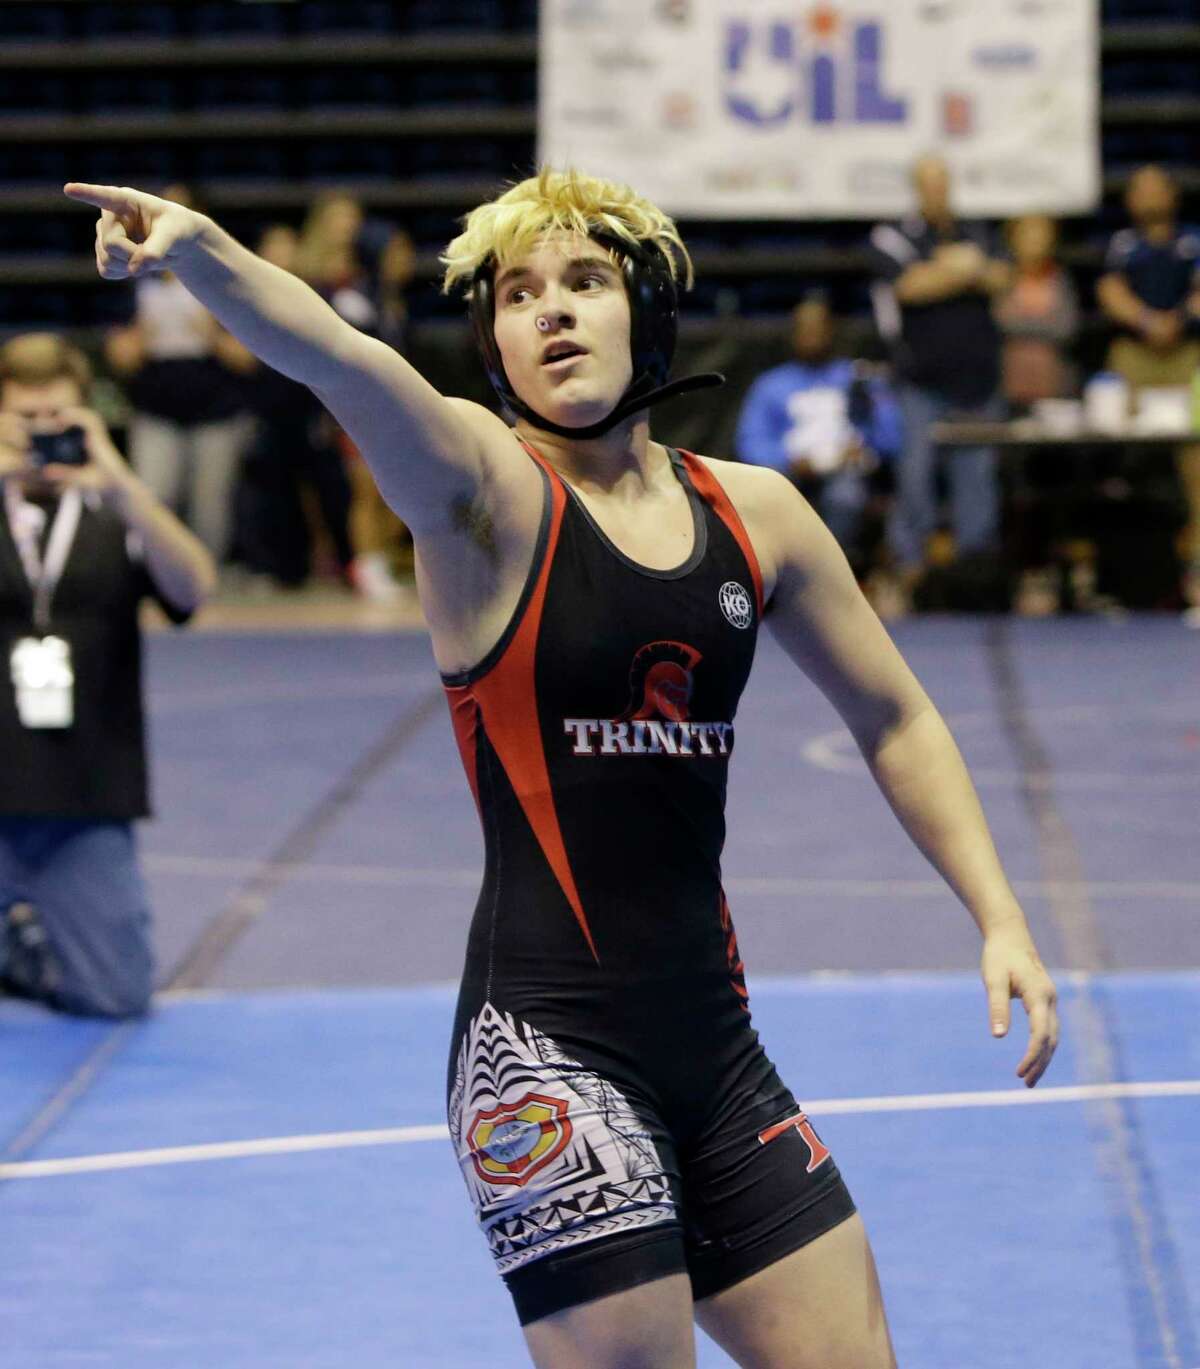 Mack Beggs, top, a transgender wrestler from Euless Trinity High School, celebrates victory over Mya Engert of Amarillo Tascosa in a quarterfinals match in the State Wrestling Tournament at Berry Center, 8877 Barker Cypress Road, Friday, Feb. 24, 2017, in Cypress. Beggs was born a girl and is transitioning to male but wrestles in the girls division.